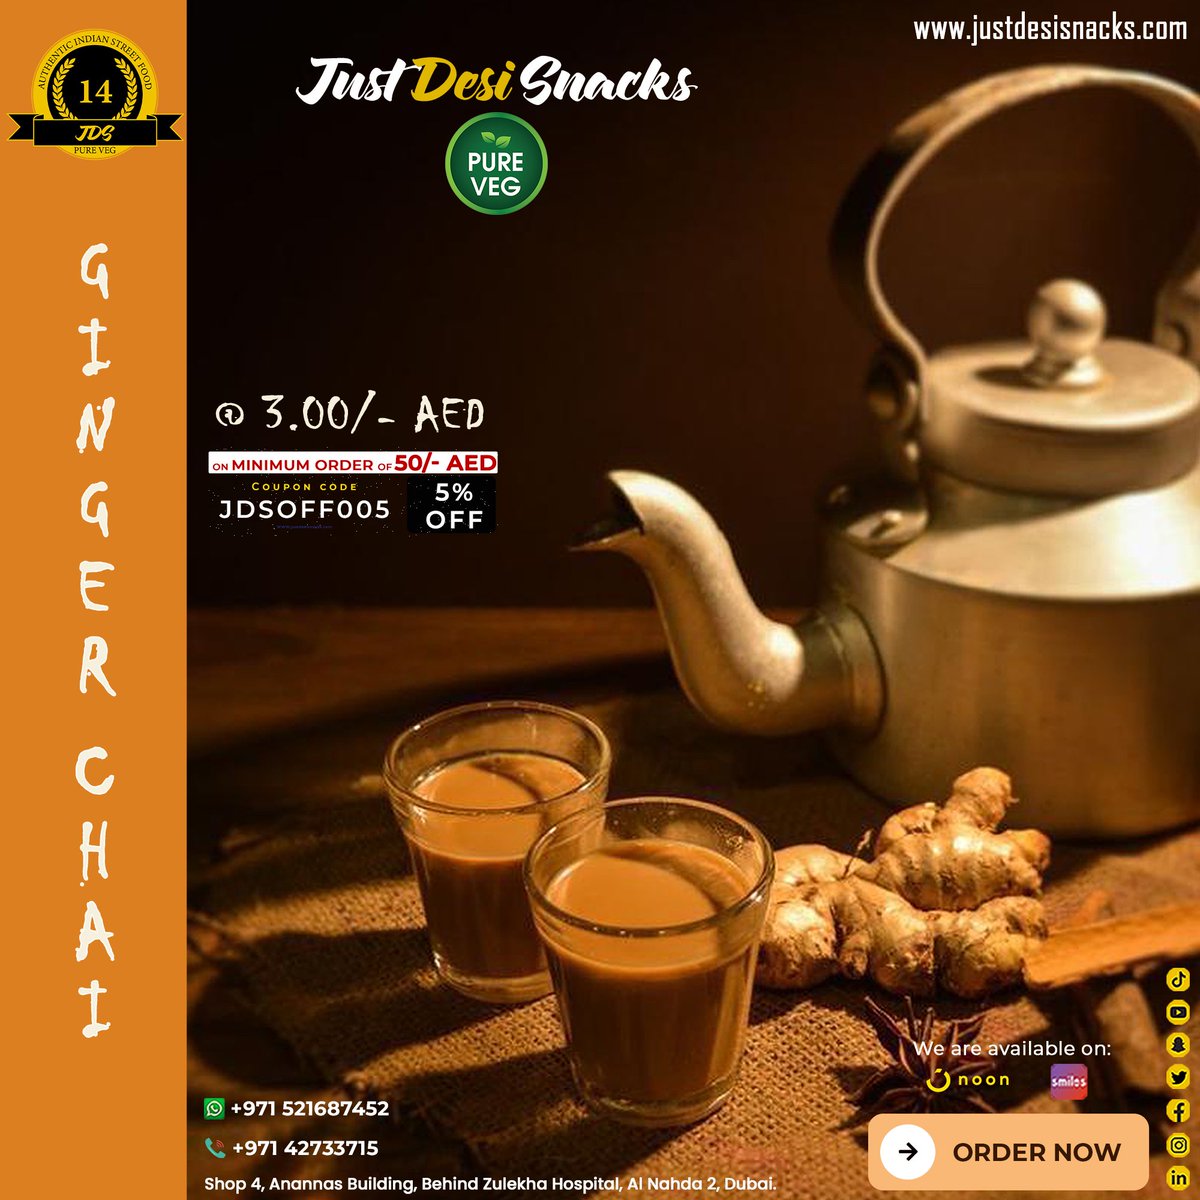 📷 Try our zesty Ginger Chai! 📷📷 Awaken your senses with aromatic spices and cozy up! 📷📷 Tag someone who'd love this soothing delight! 📷📷 #GingerChai #CozyVibes #SipAndSavor
justdesisnacks.com
+971 4273 3715
#justdesisnacks#authenticindianfood #alnahda #pureveg #Dubai